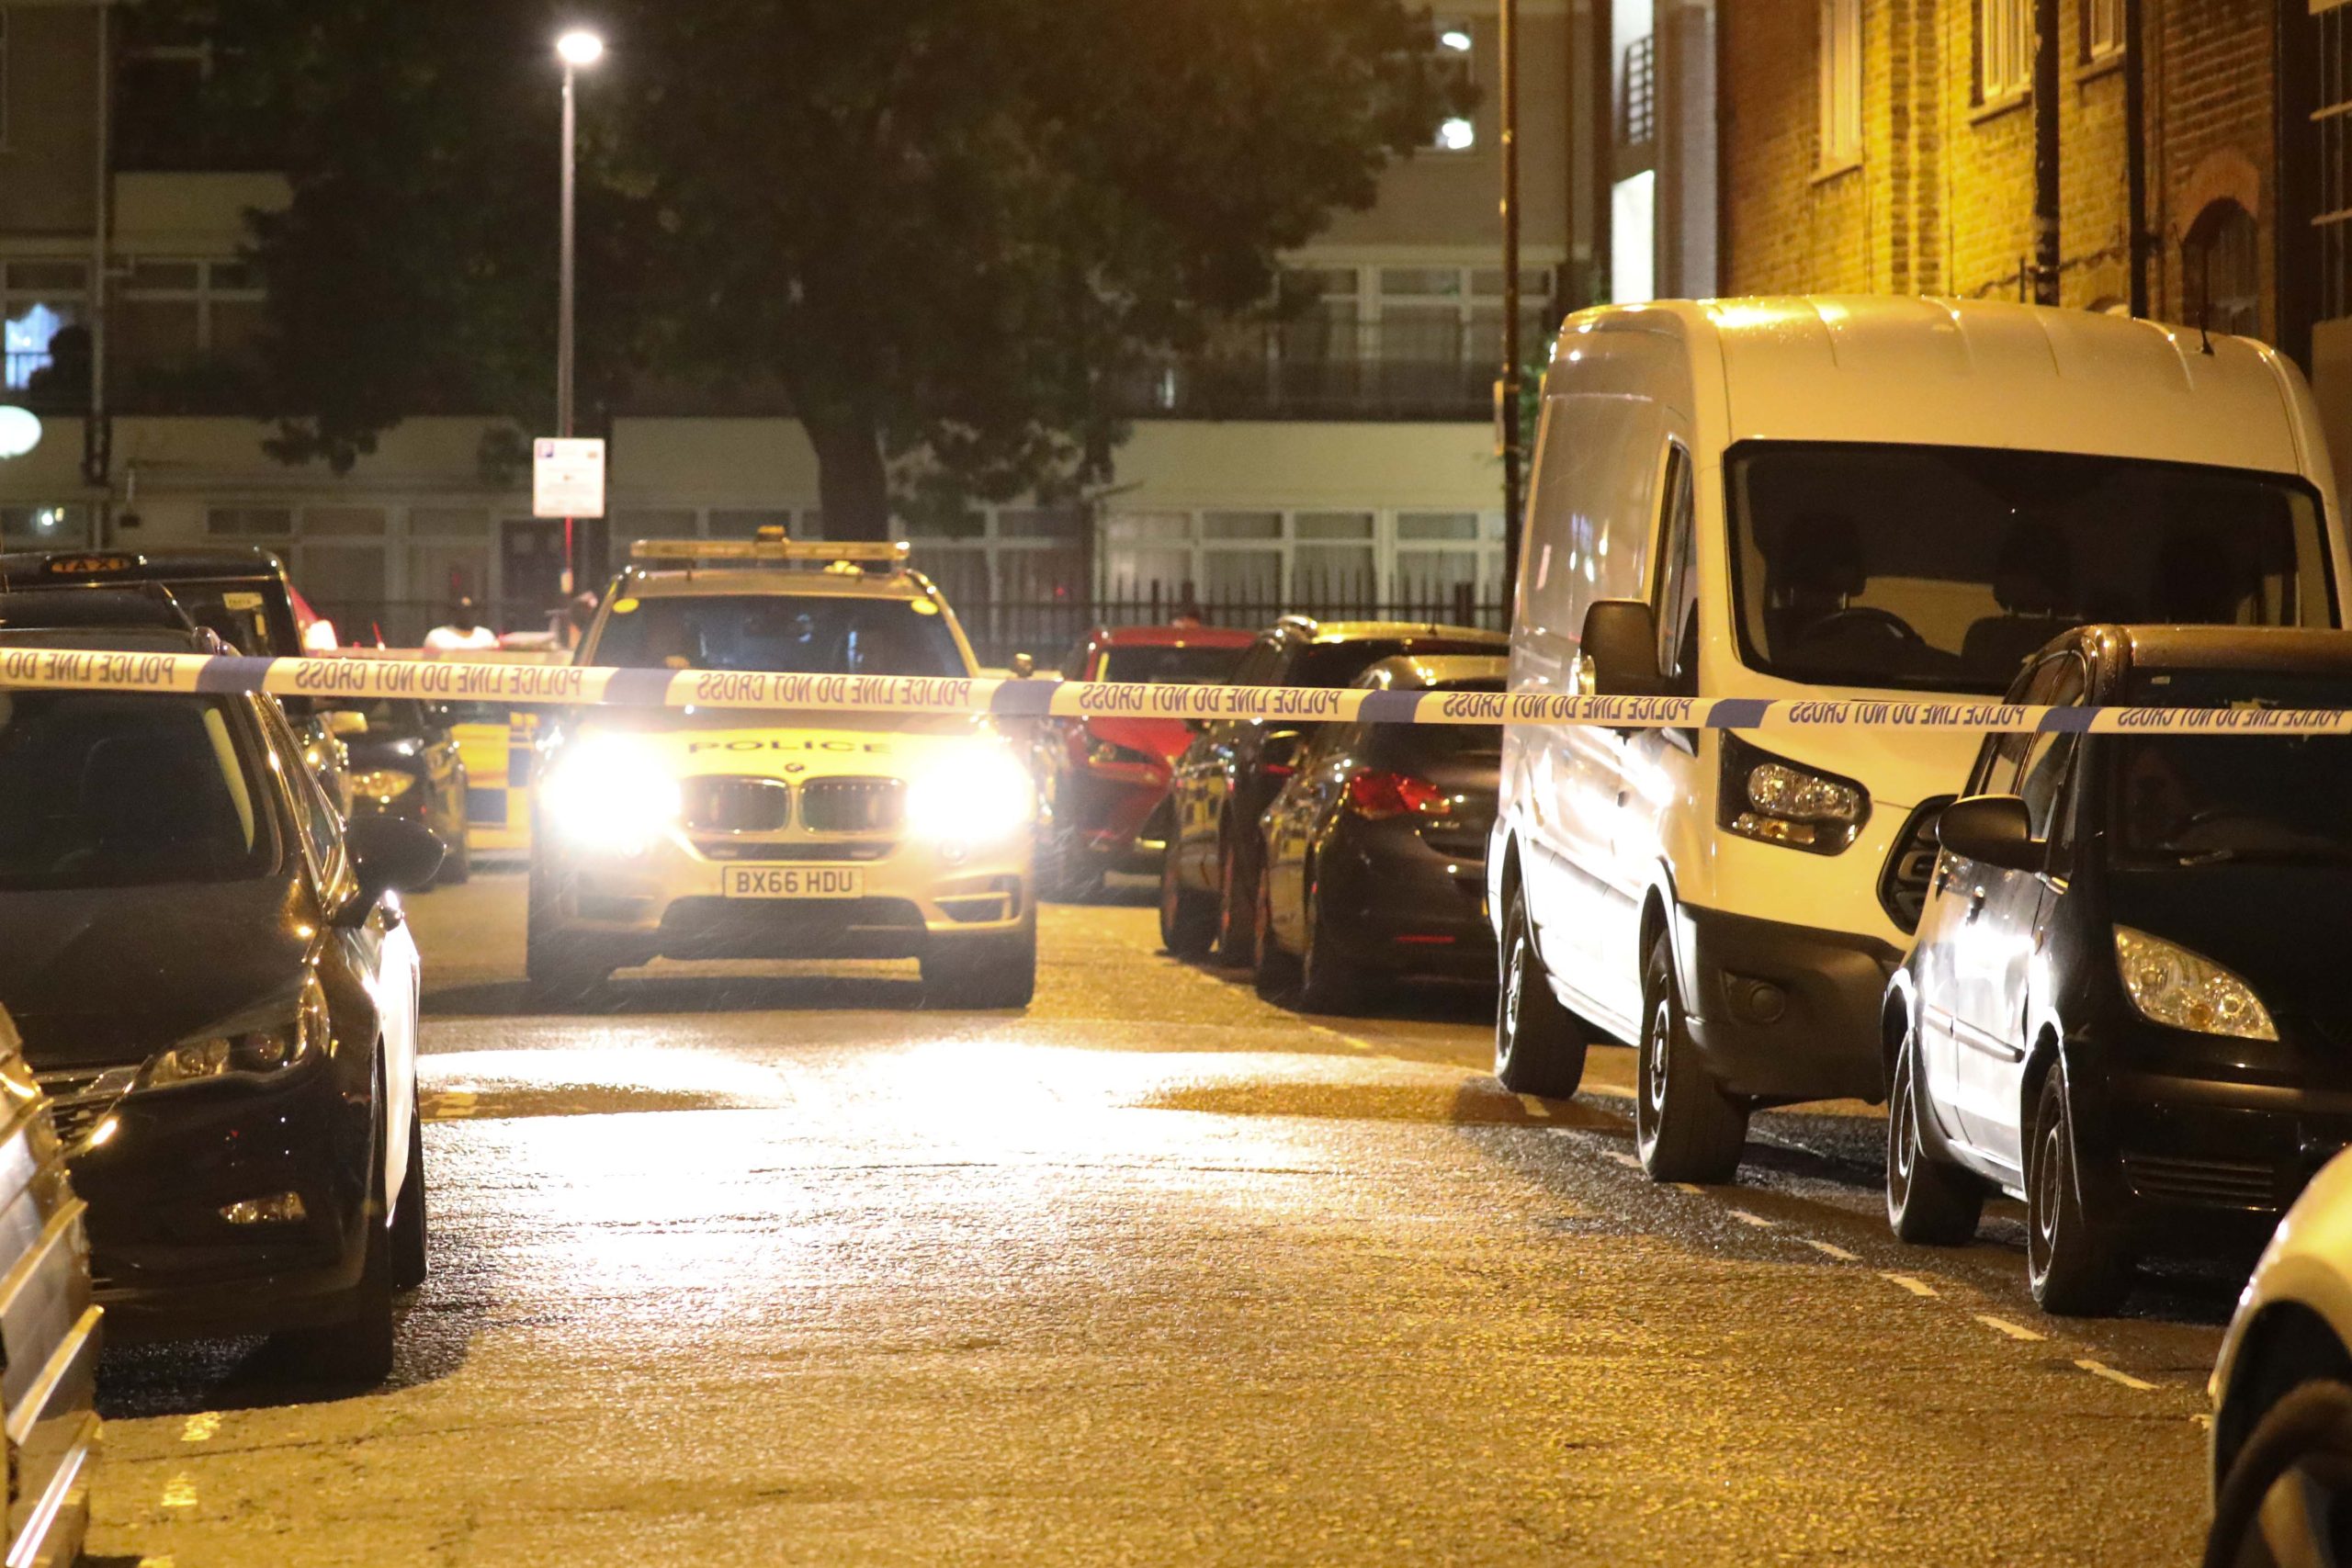 South East London street thrown into armed lockdown following reports of a man with a weapon